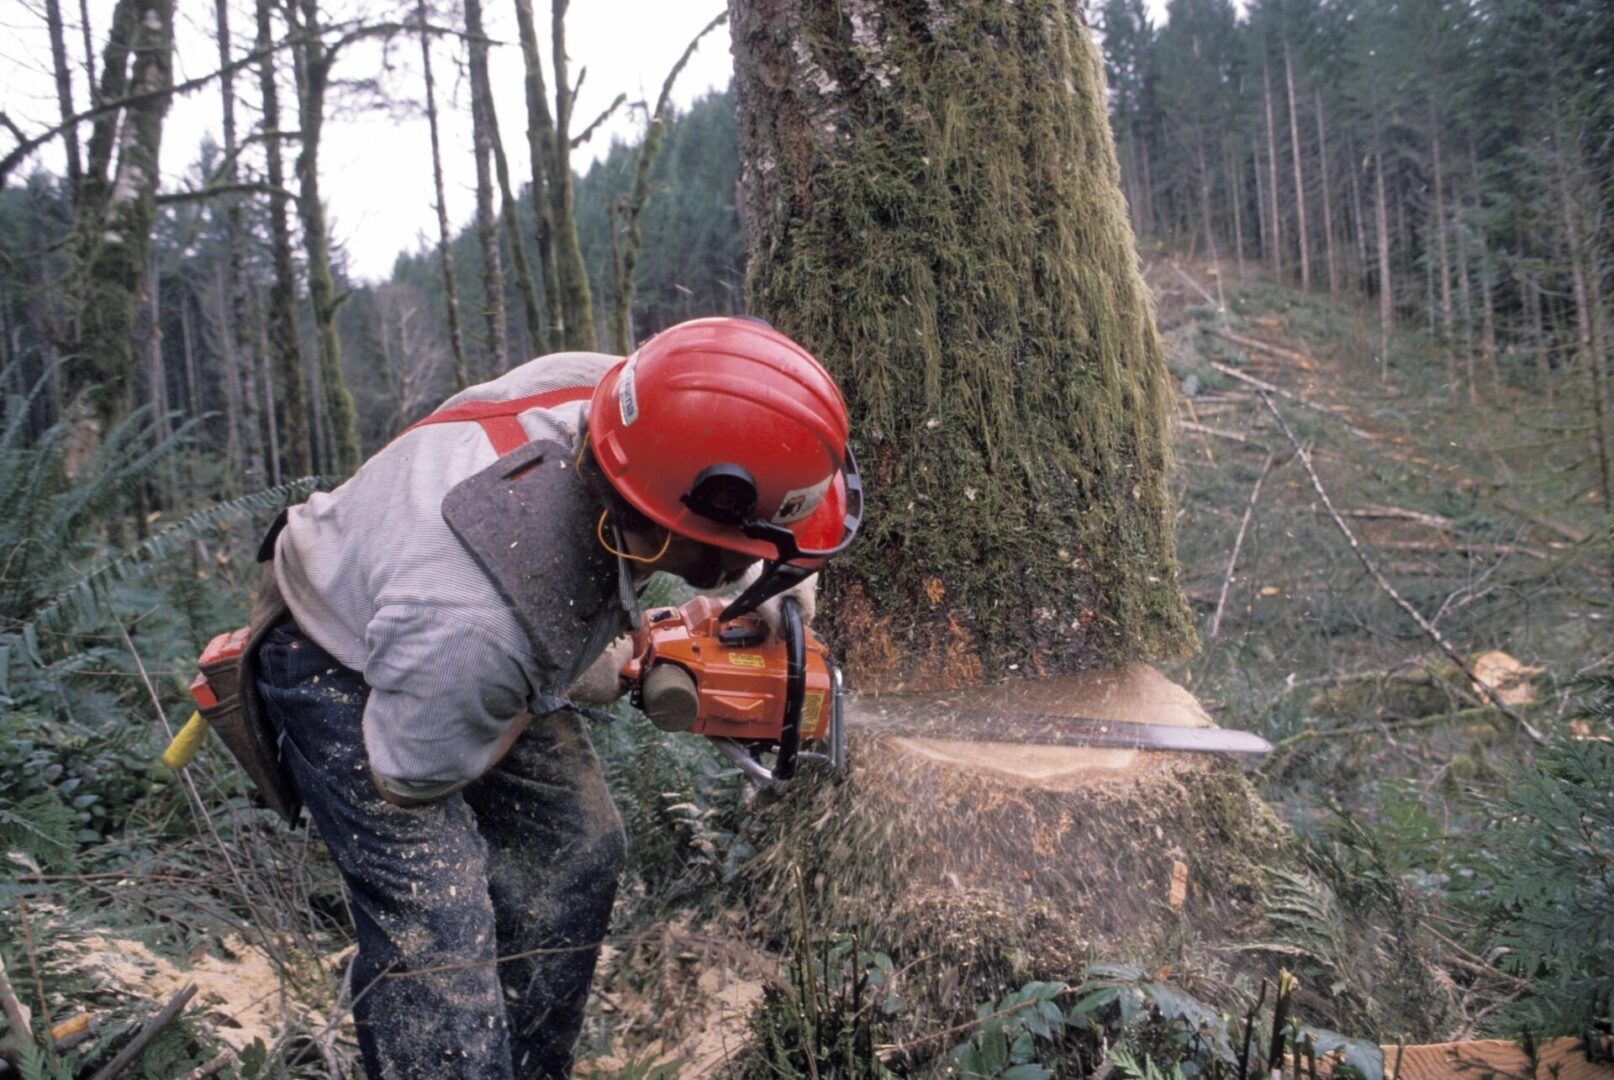 A man cutting trees with a chainsaw in the woods.